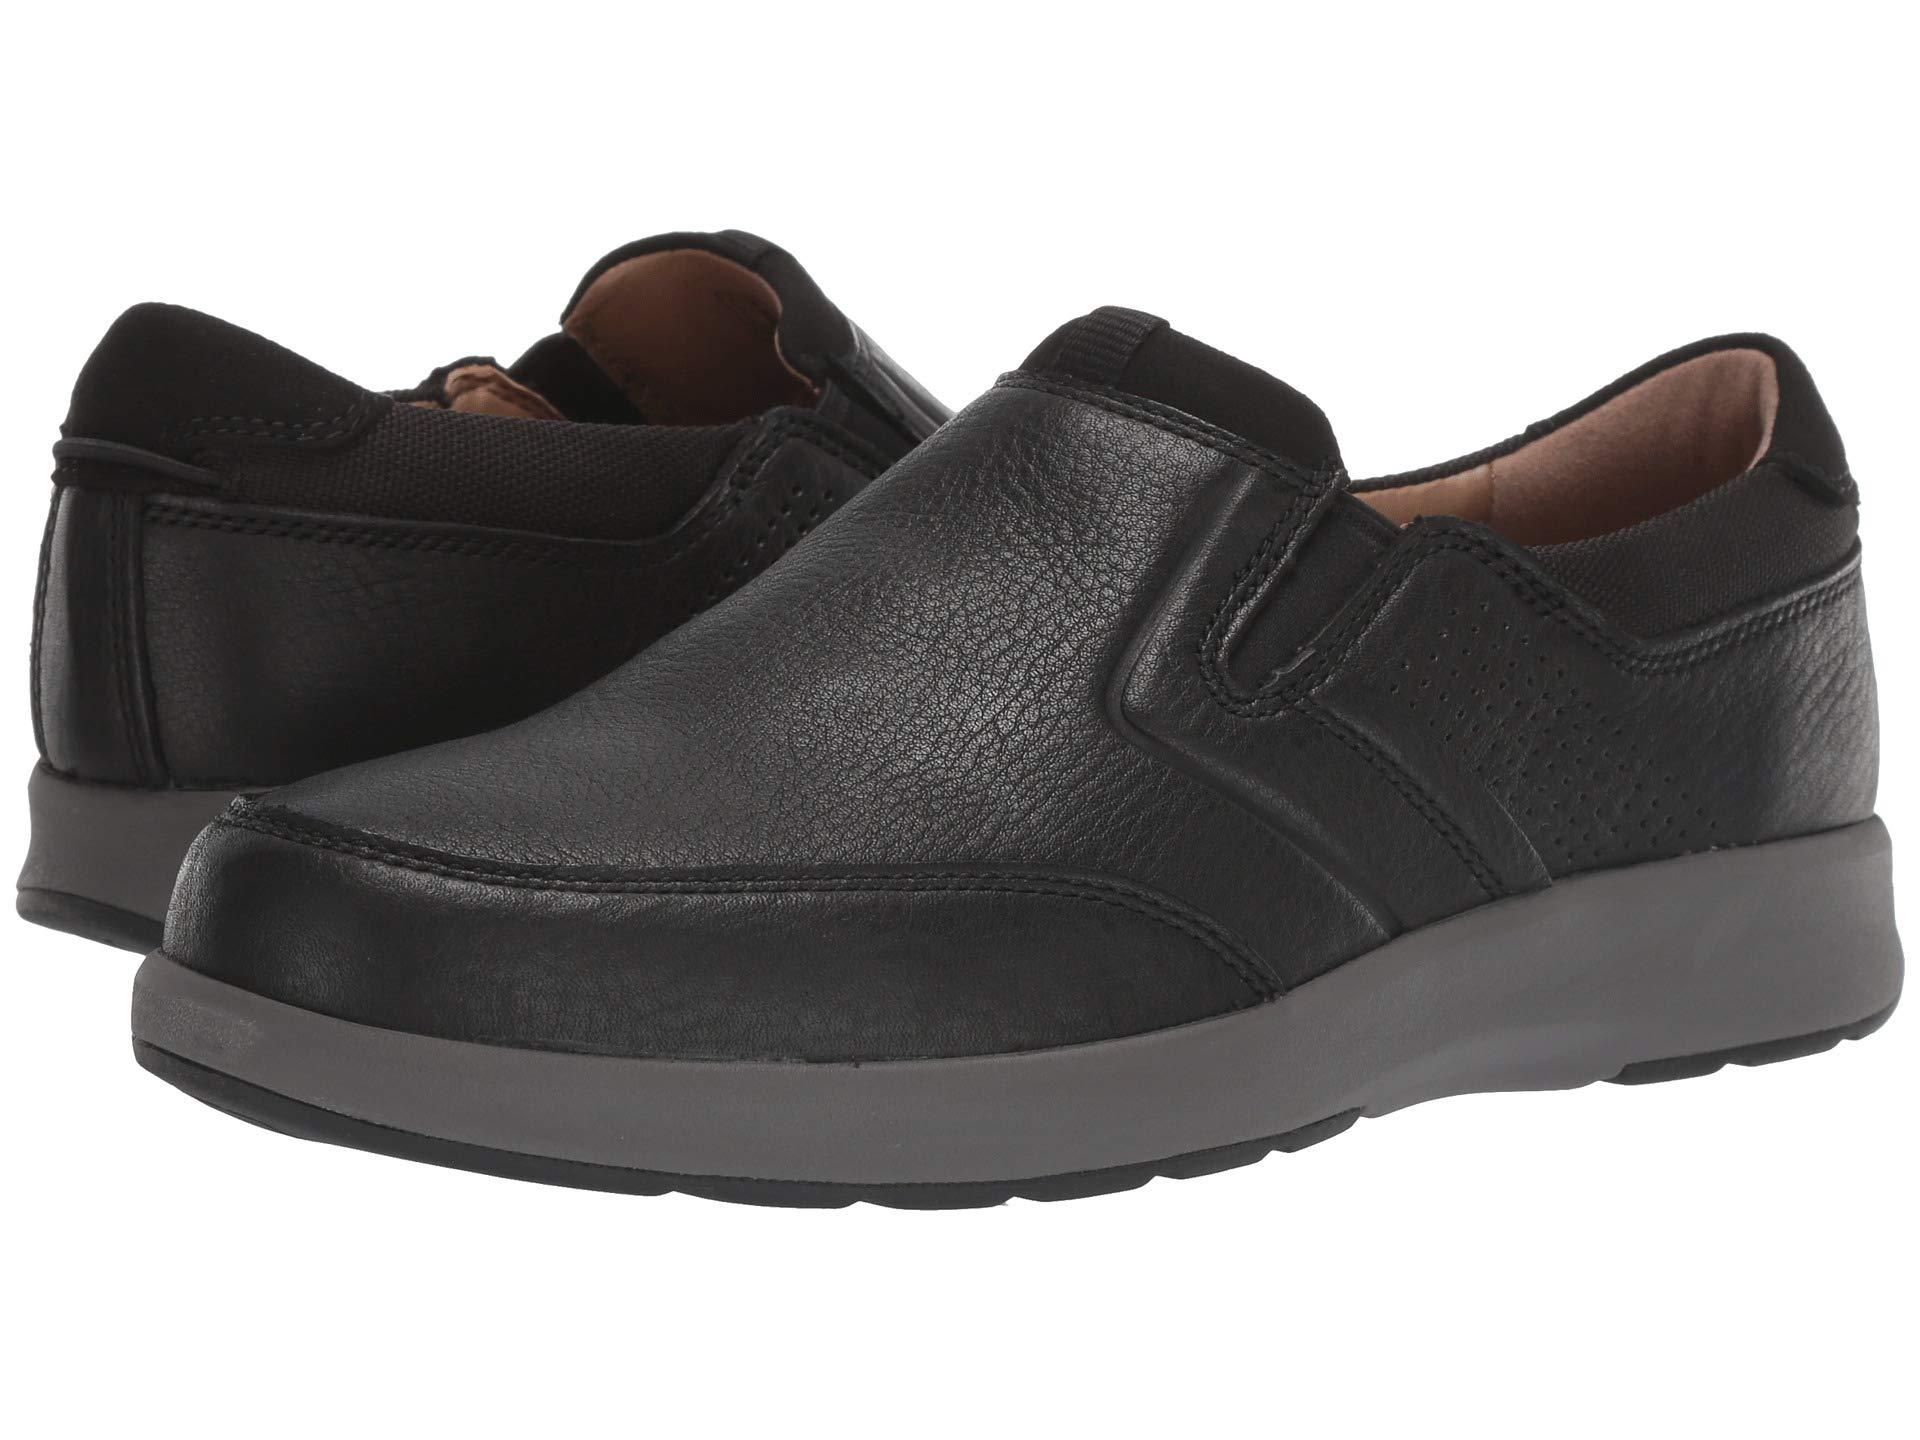 Clarks Leather Un Trail Step Loafer in Black for Men - Lyst